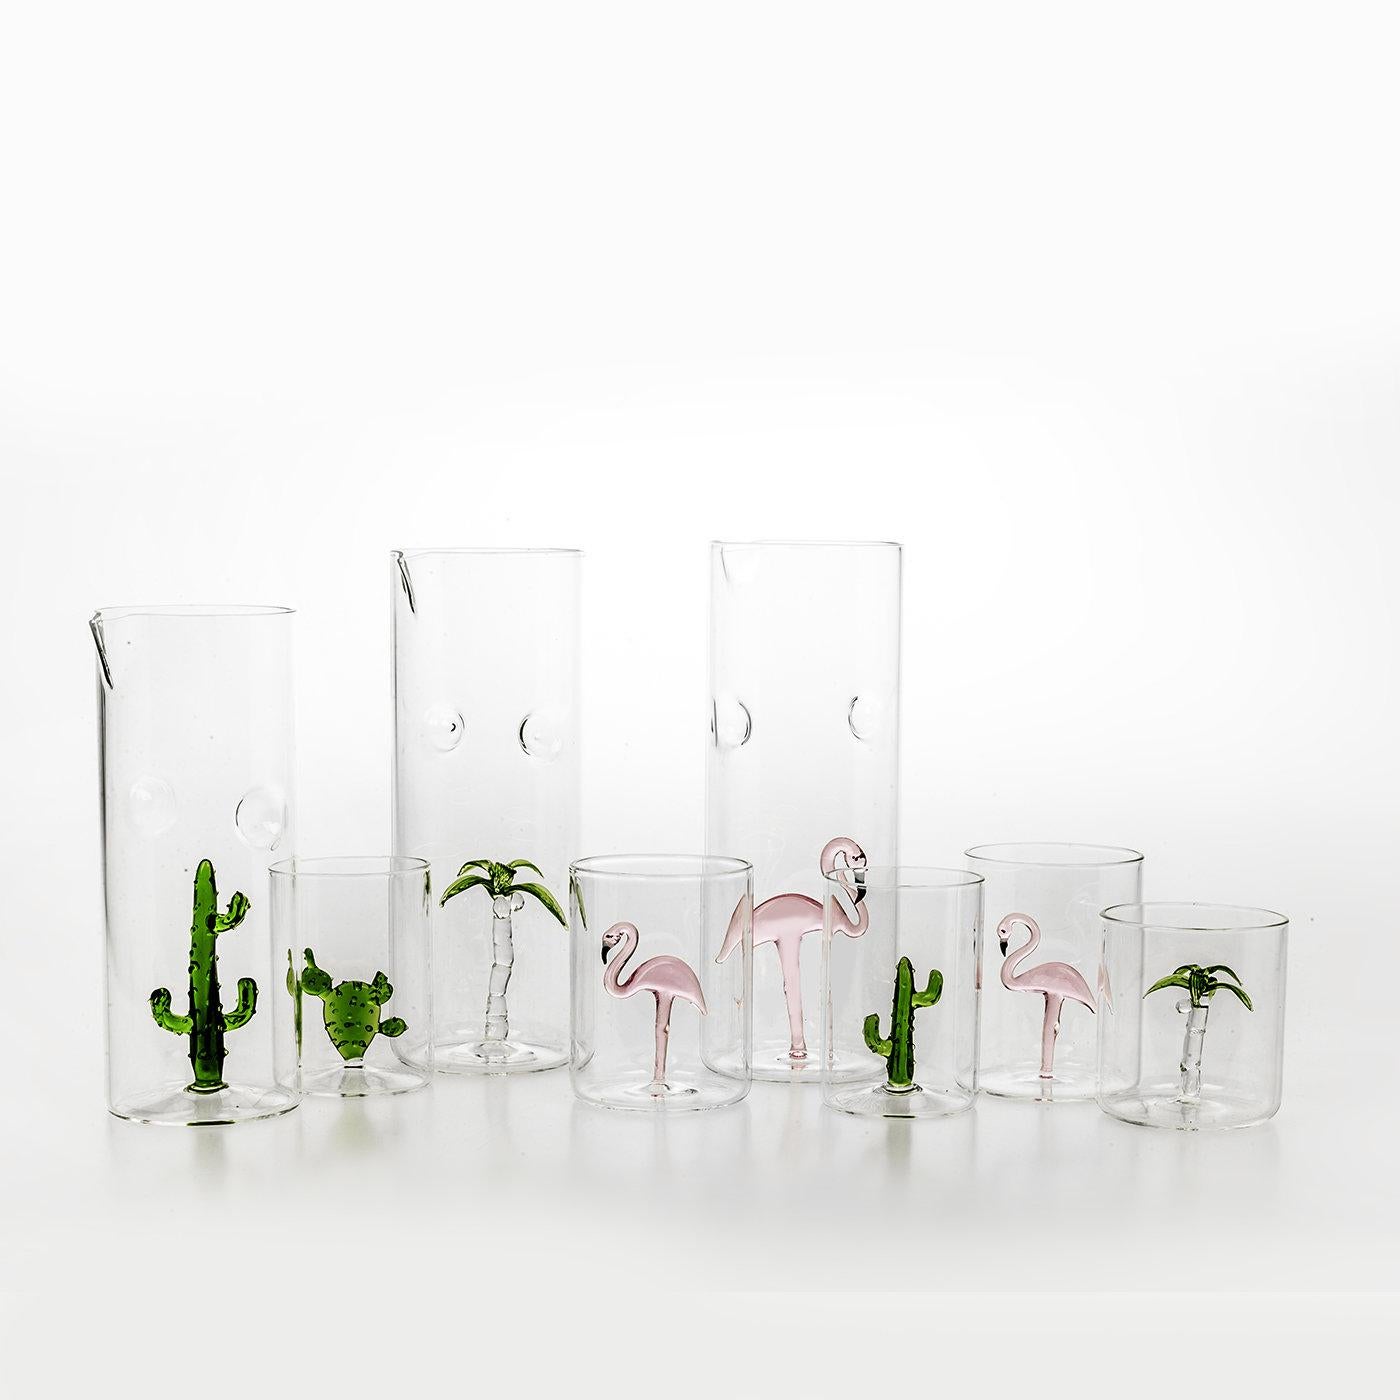 Part of a collection inspired by the colorful world of nature, this set of four versatile glasses will be a fresh addition to a dining room, bringing indoor the relaxed atmosphere of a garden in the summer. These four functional objects are